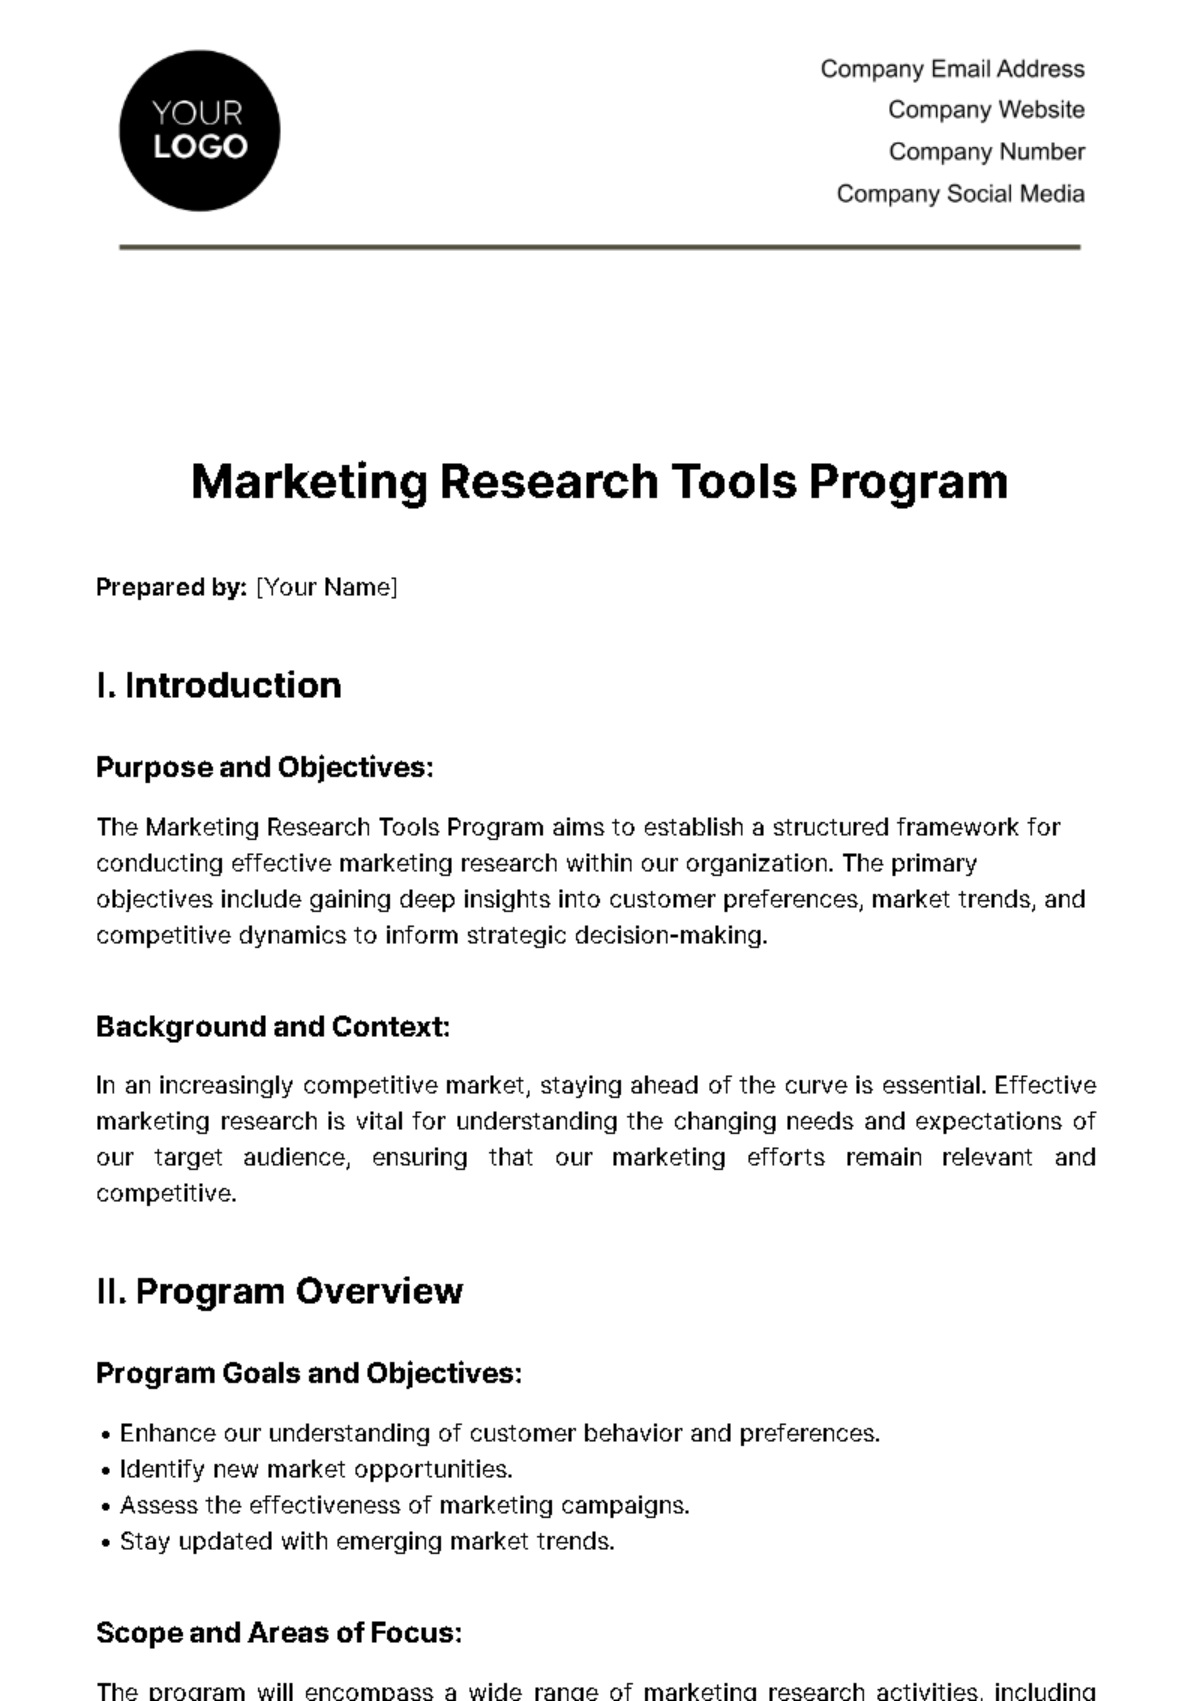 Marketing Research Tools Program Template